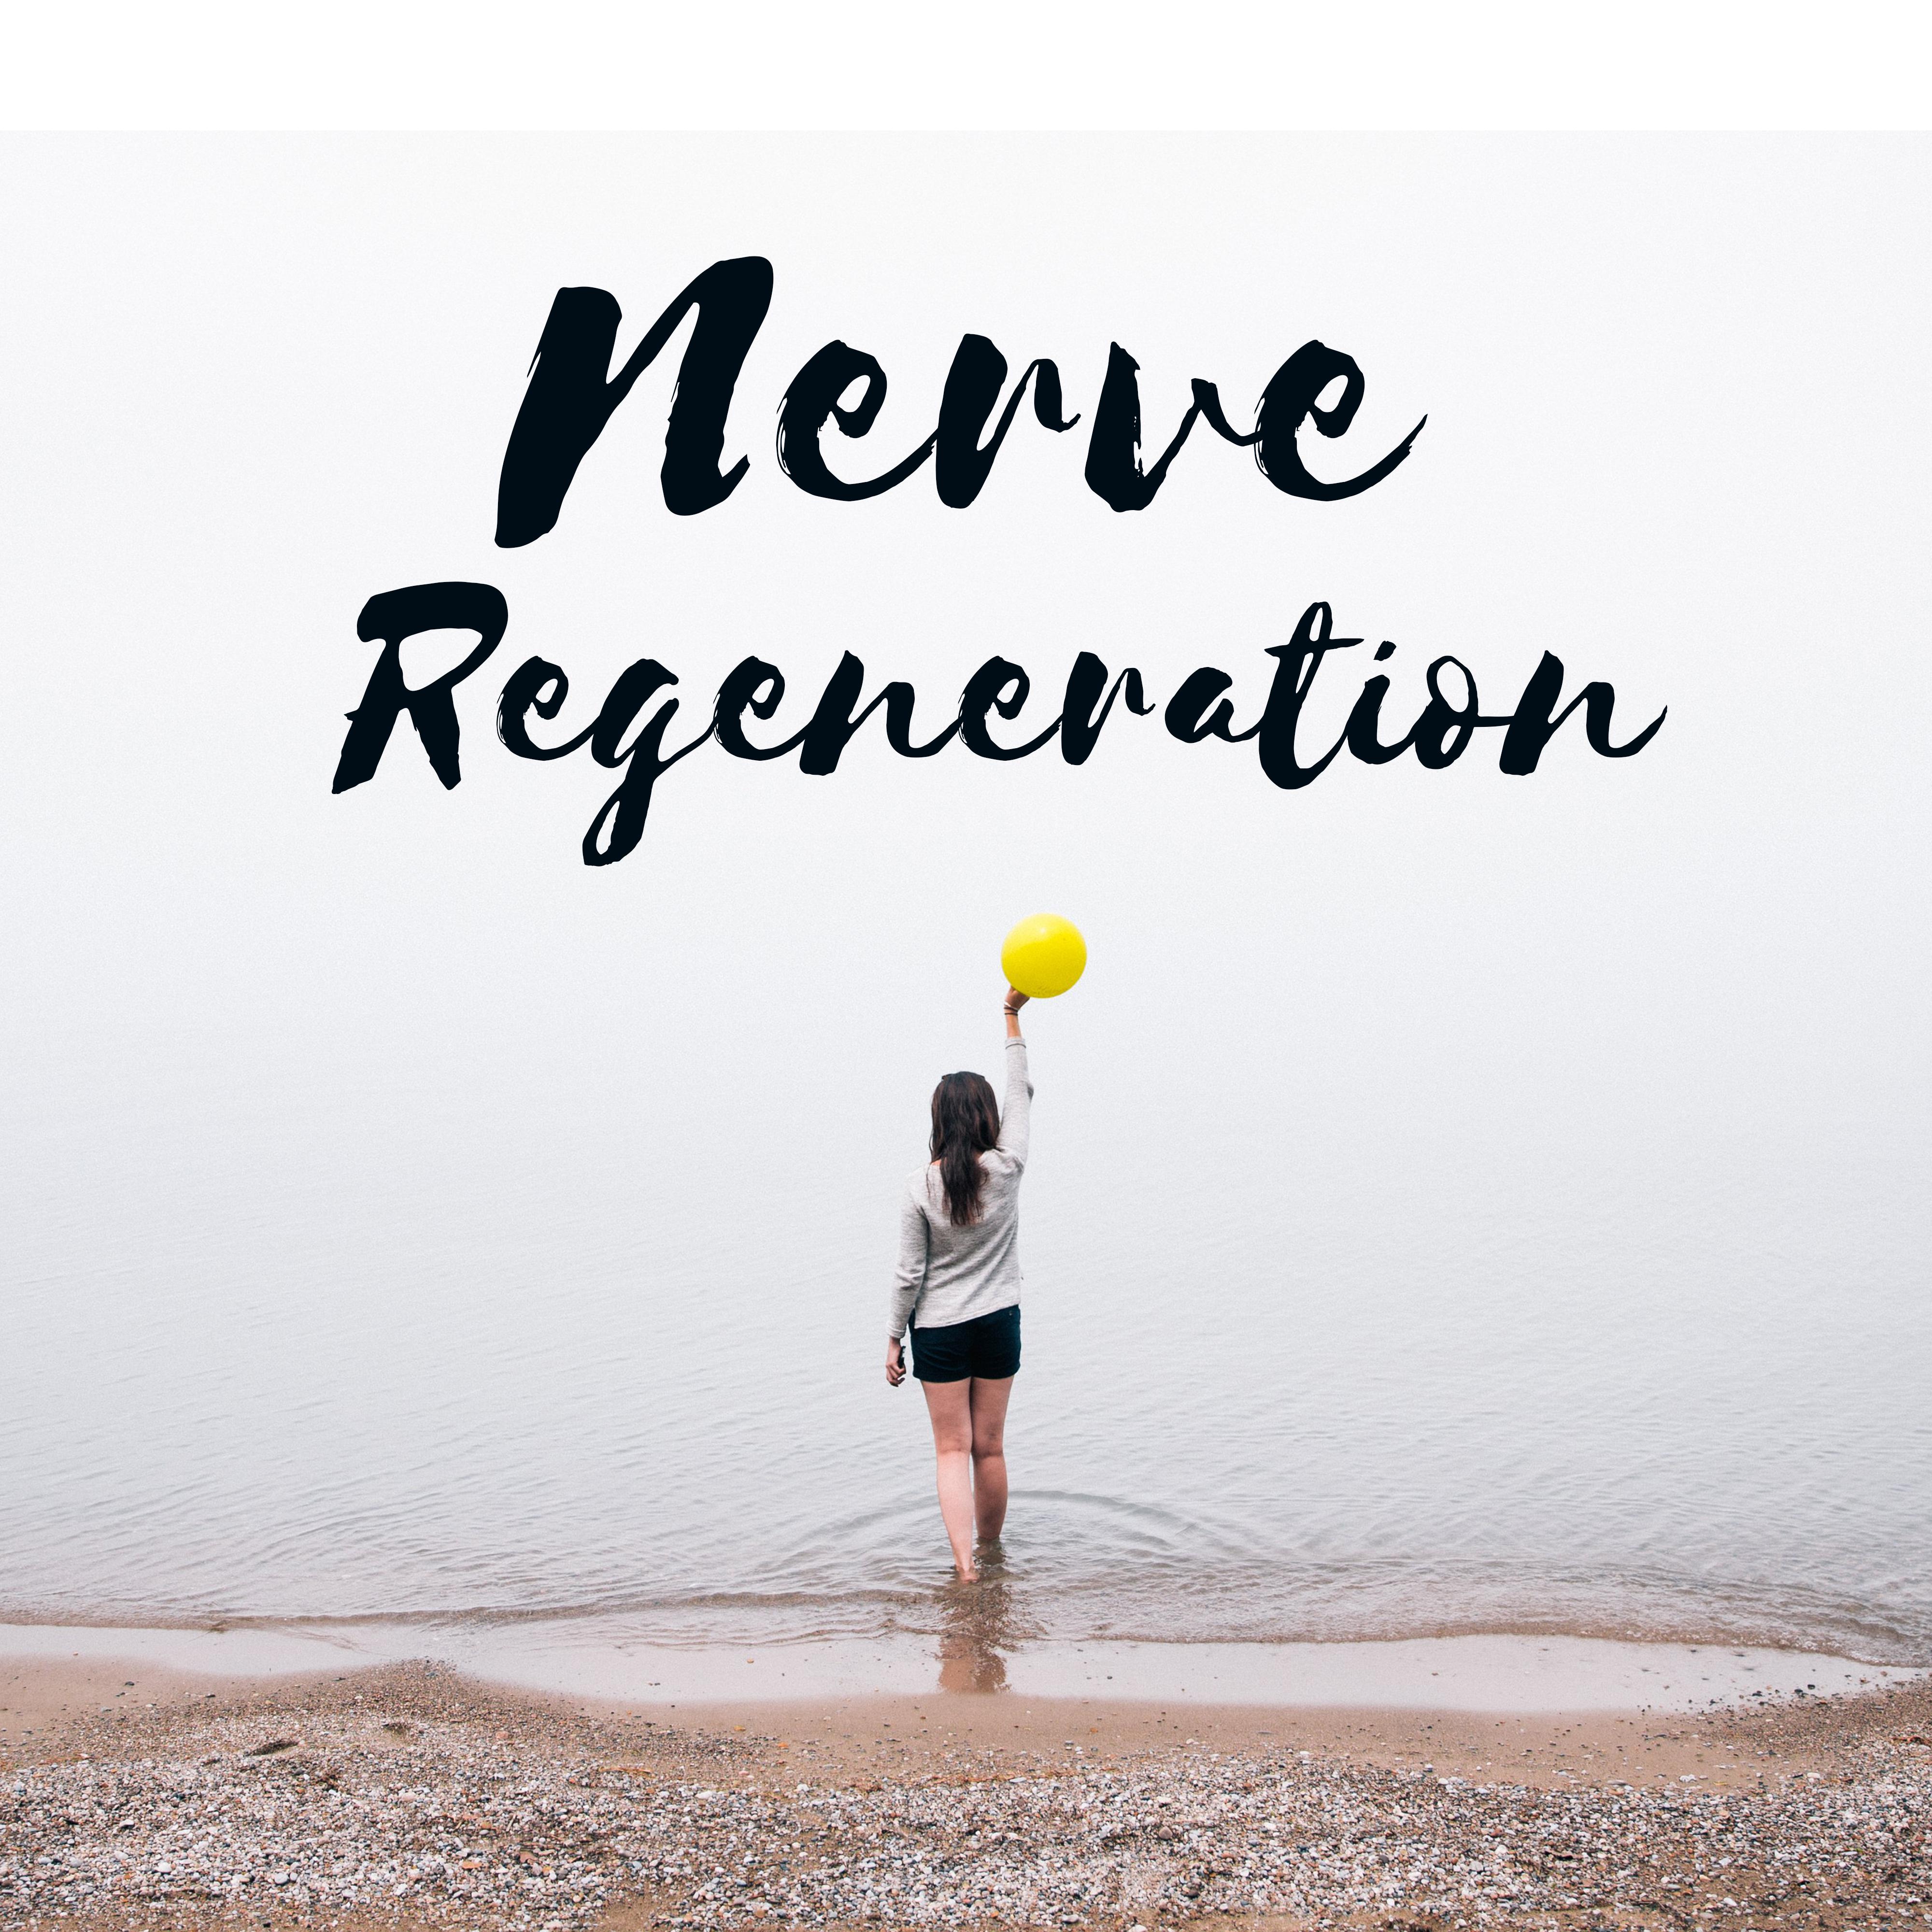 Nerve Regeneration – Relaxing Music Therapy, Calm Down, Rest, Relax, Relief Stress, Zen